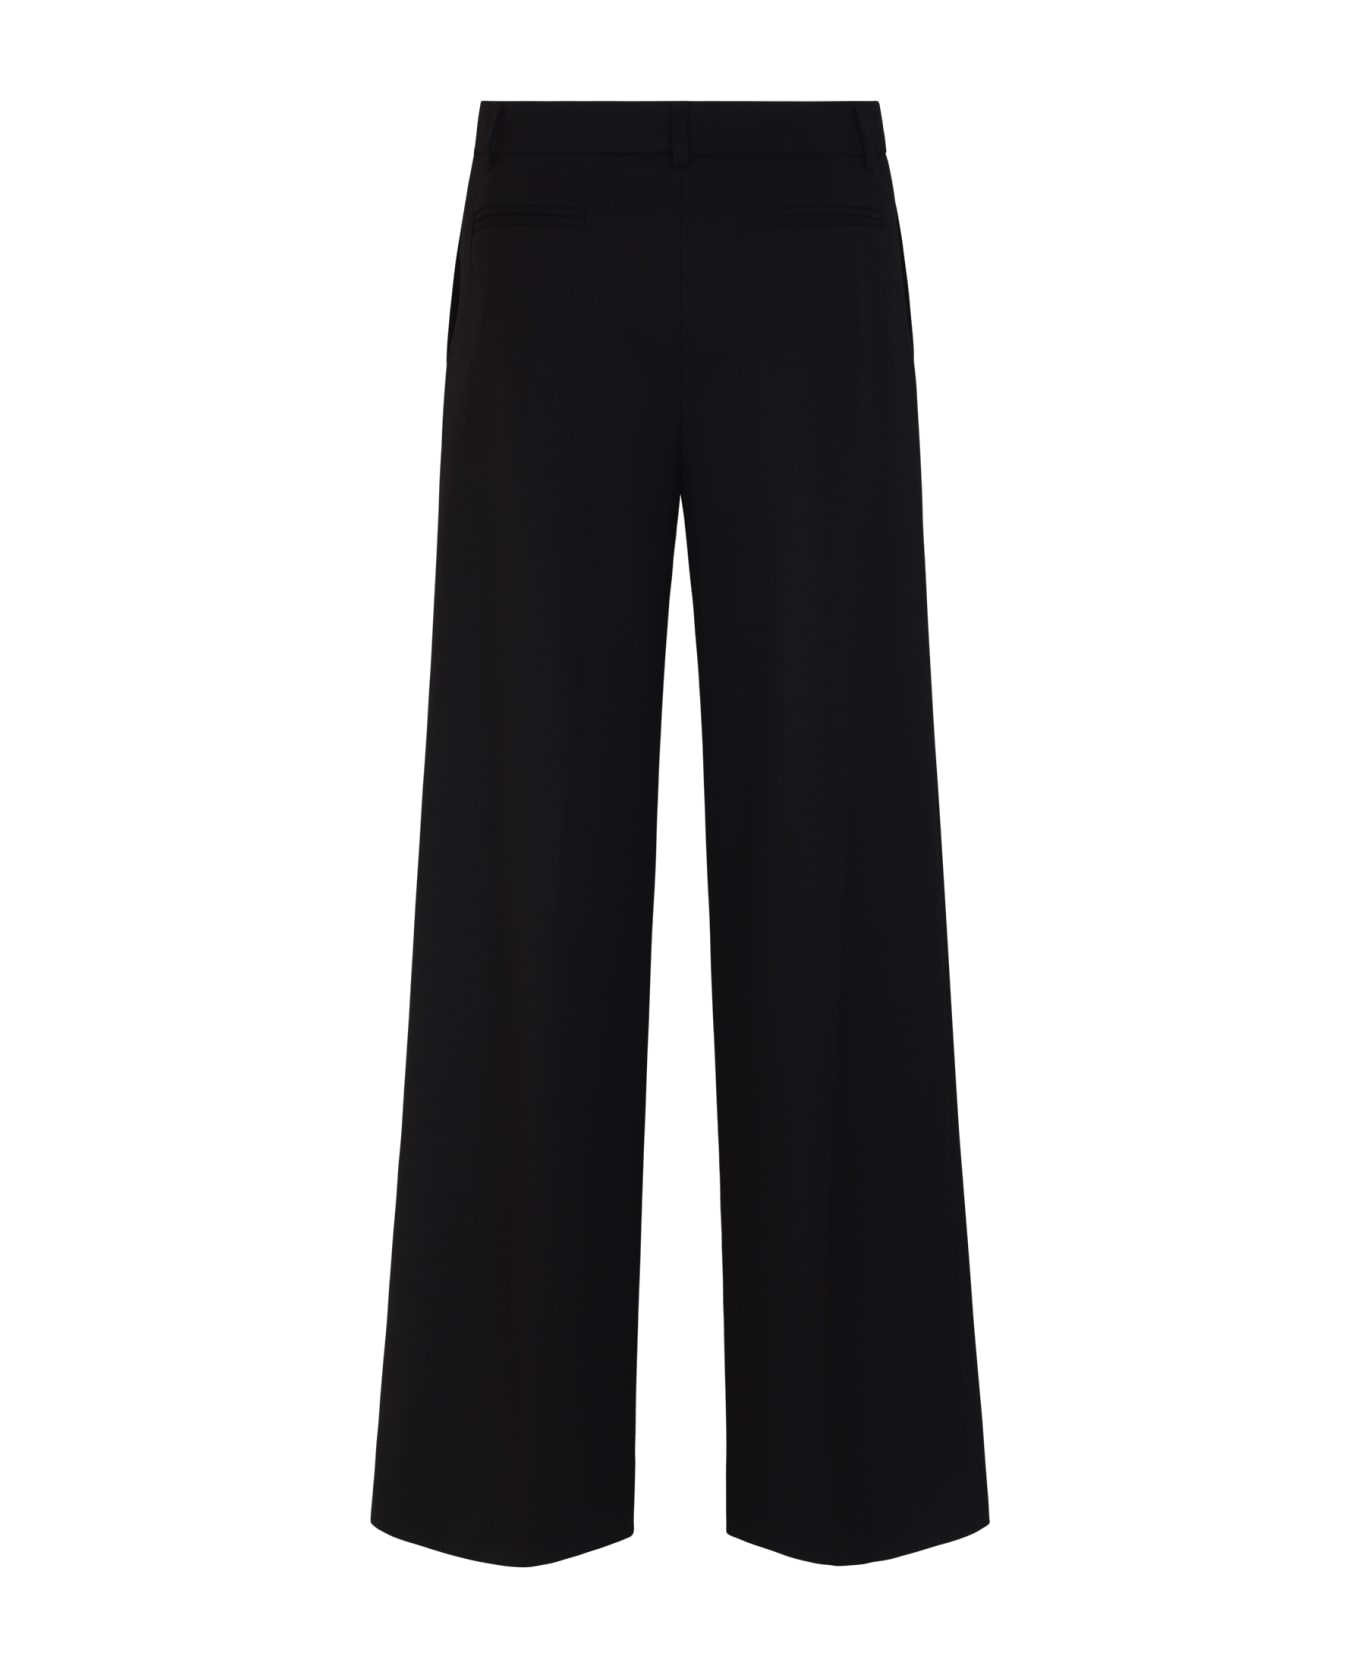 QL2 Straight Concealed con Trousers - Black